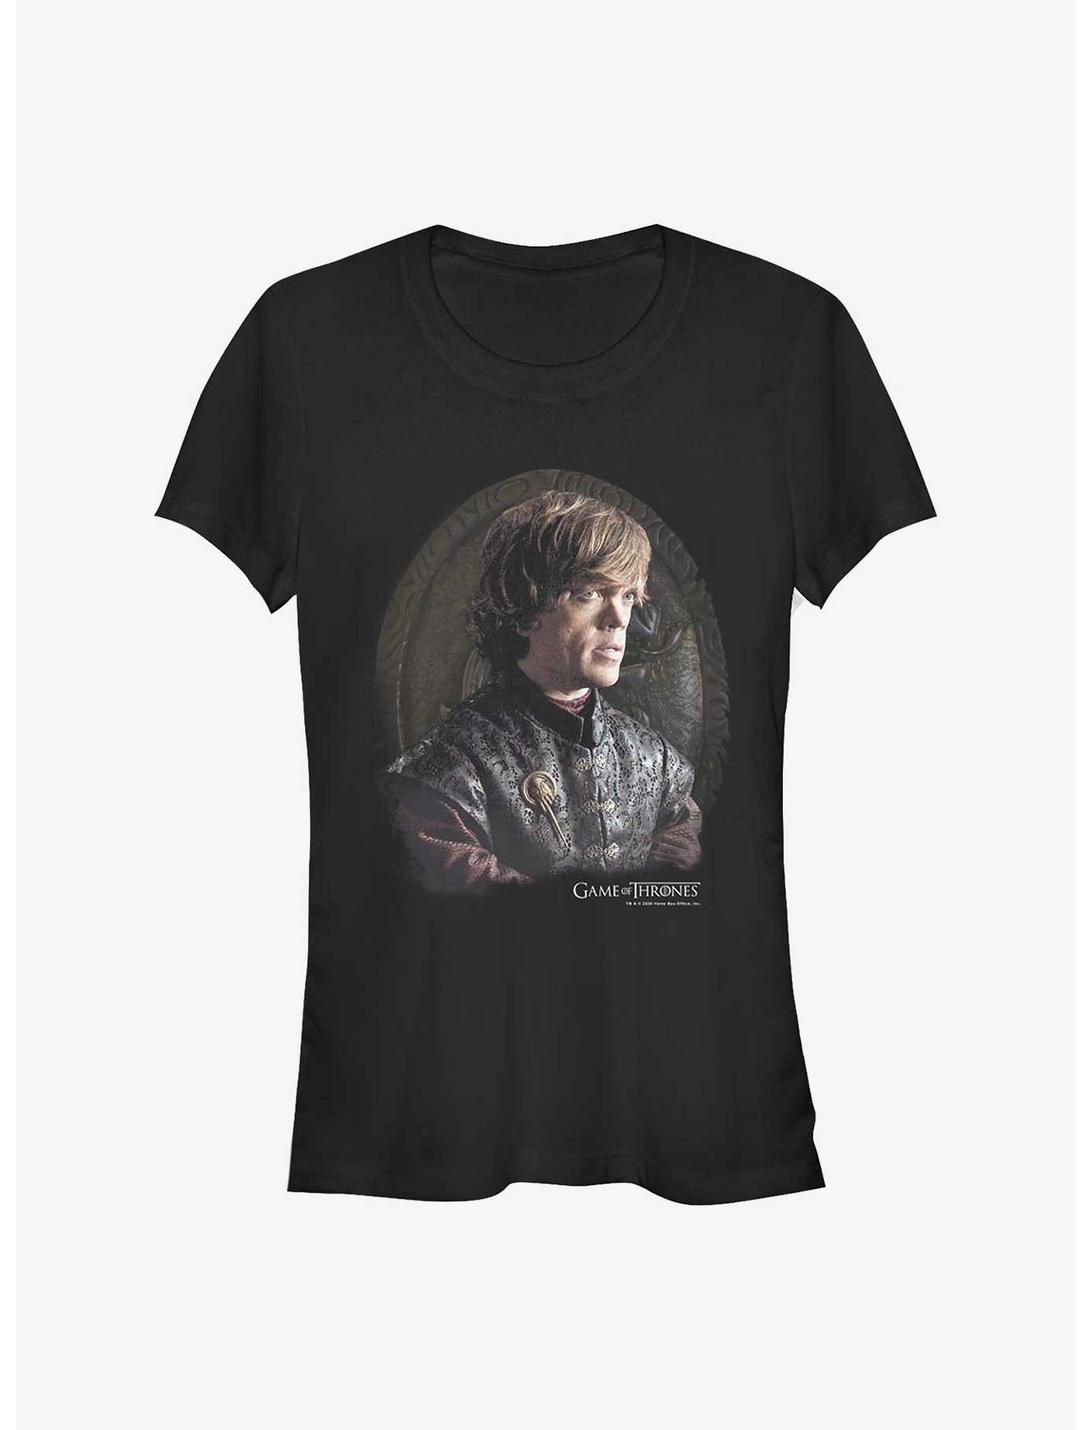 Game Of Thrones Tyrion Lannister Photo Girls T-Shirt, BLACK, hi-res